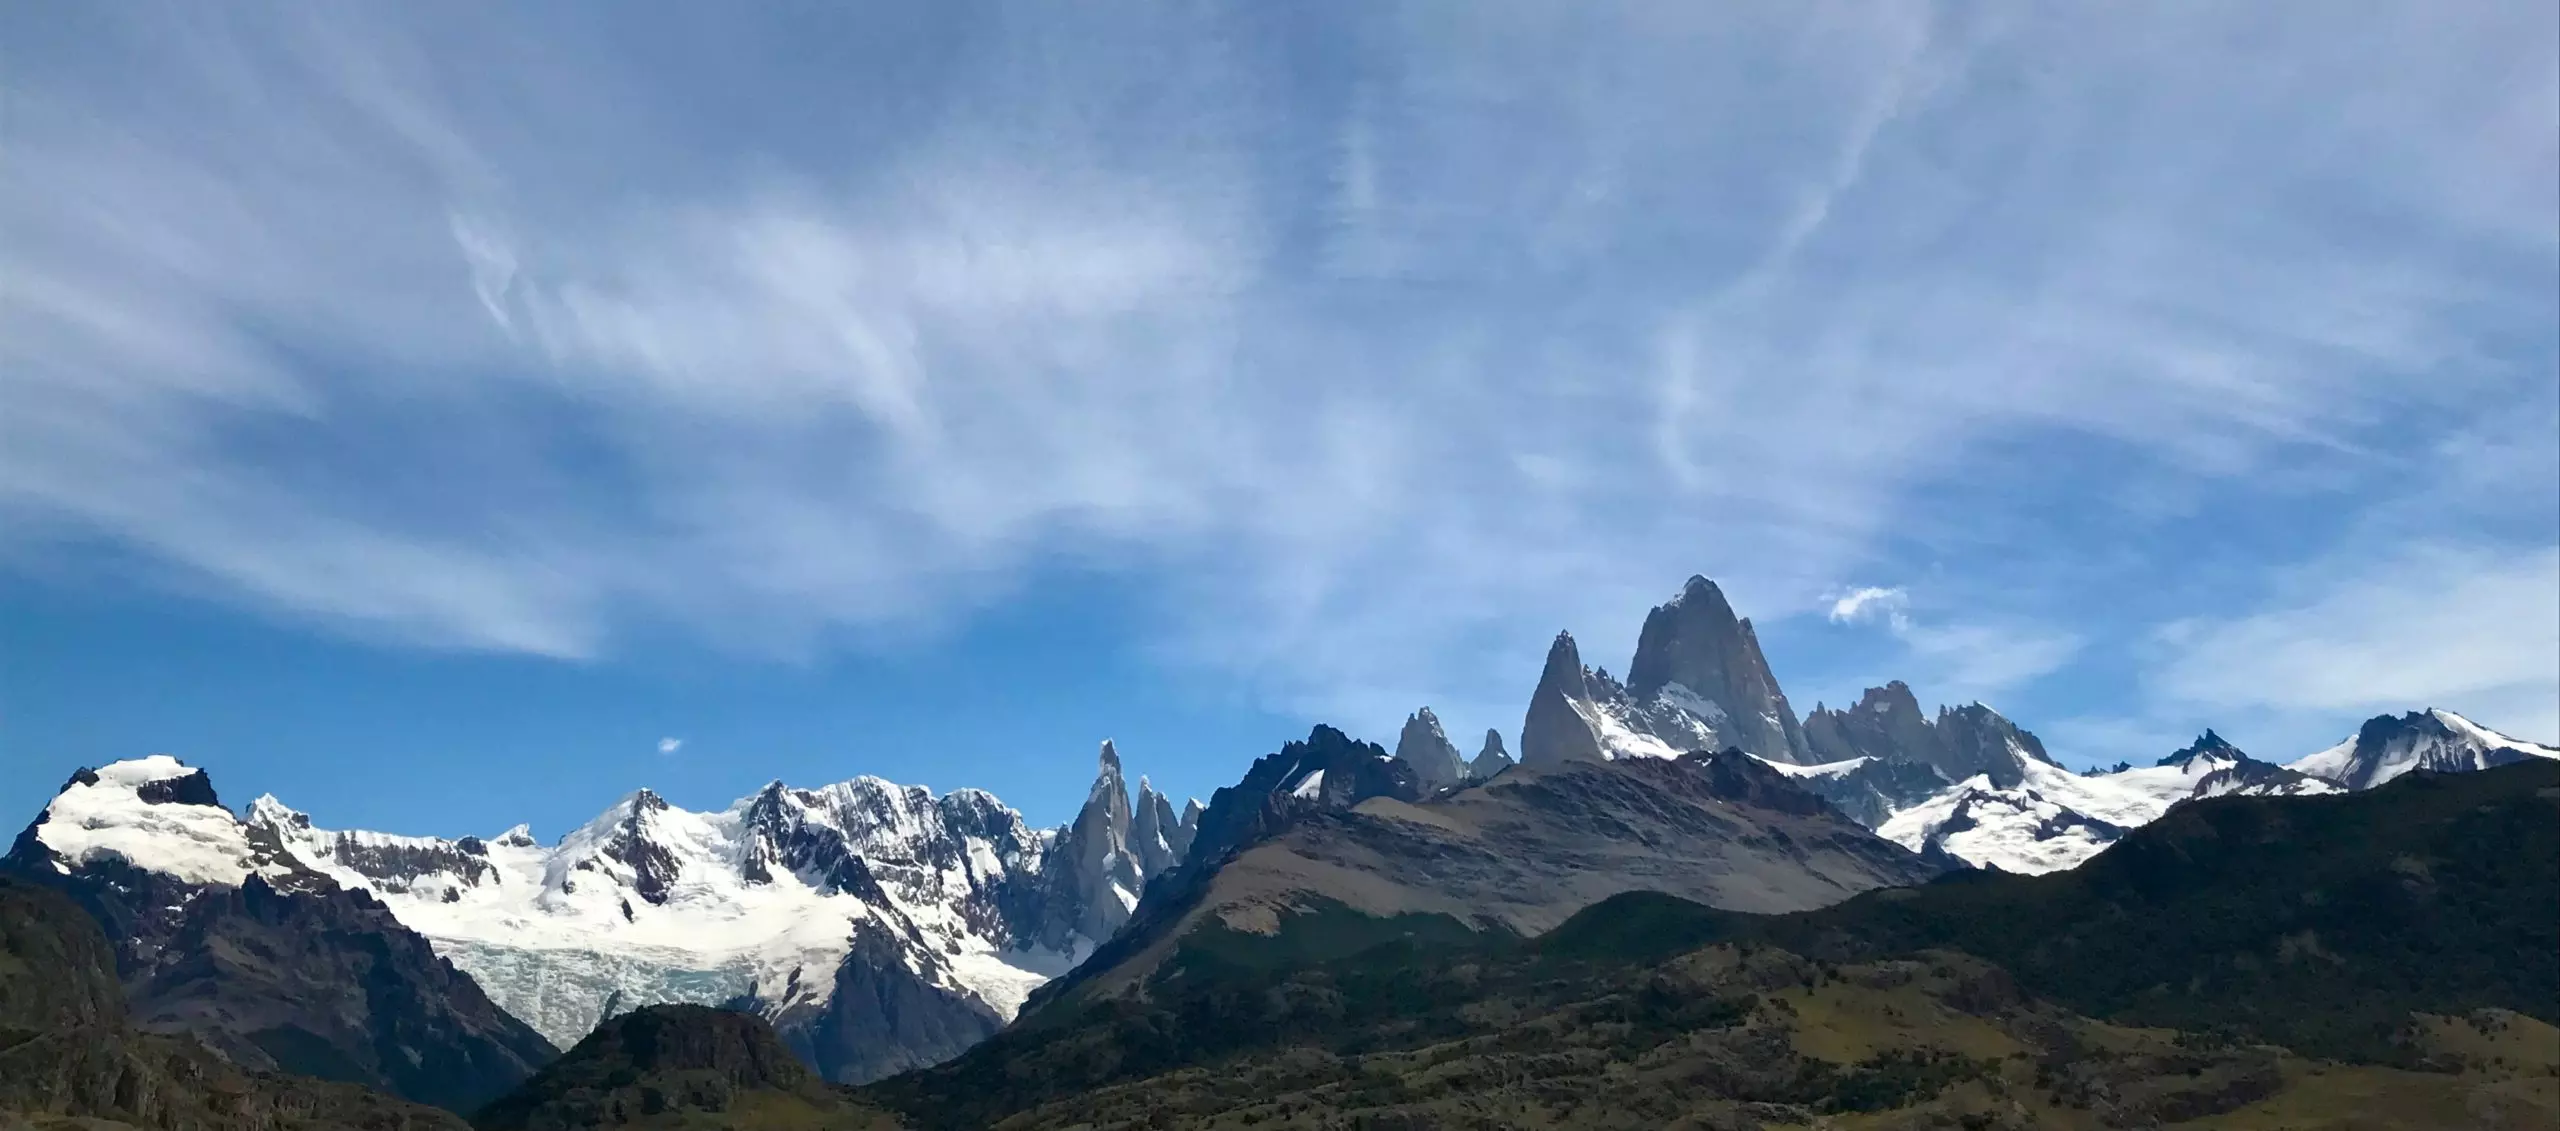 Argentine Patagonia on a Student Budget